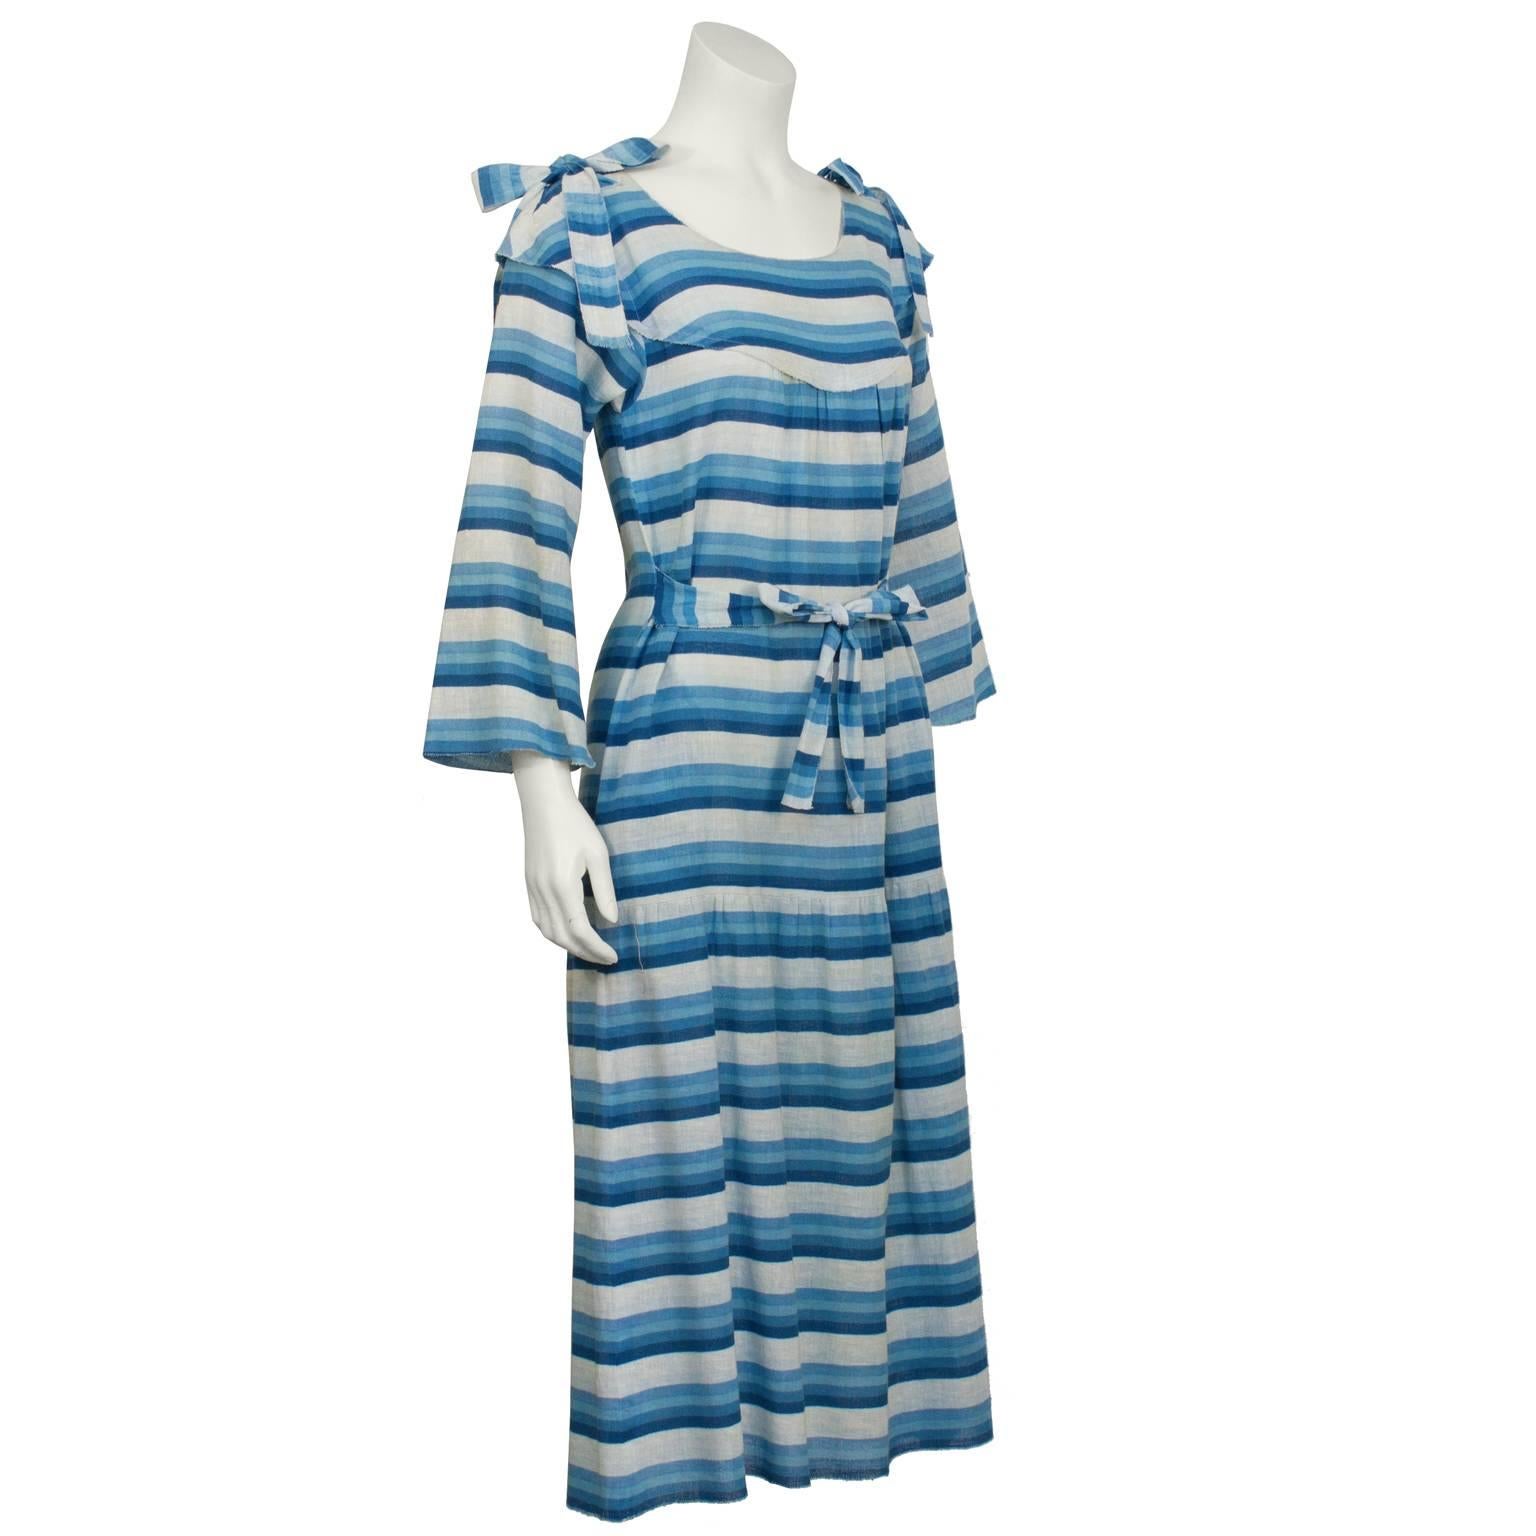 1970's Sonia Rykiel boho blue striped peasant dress. Drop waist style dress features pockets at the hips and a narrow belt that can be done up in the front or back. Yoke style neckline finished with straps that can be tied in bows at the shoulders.